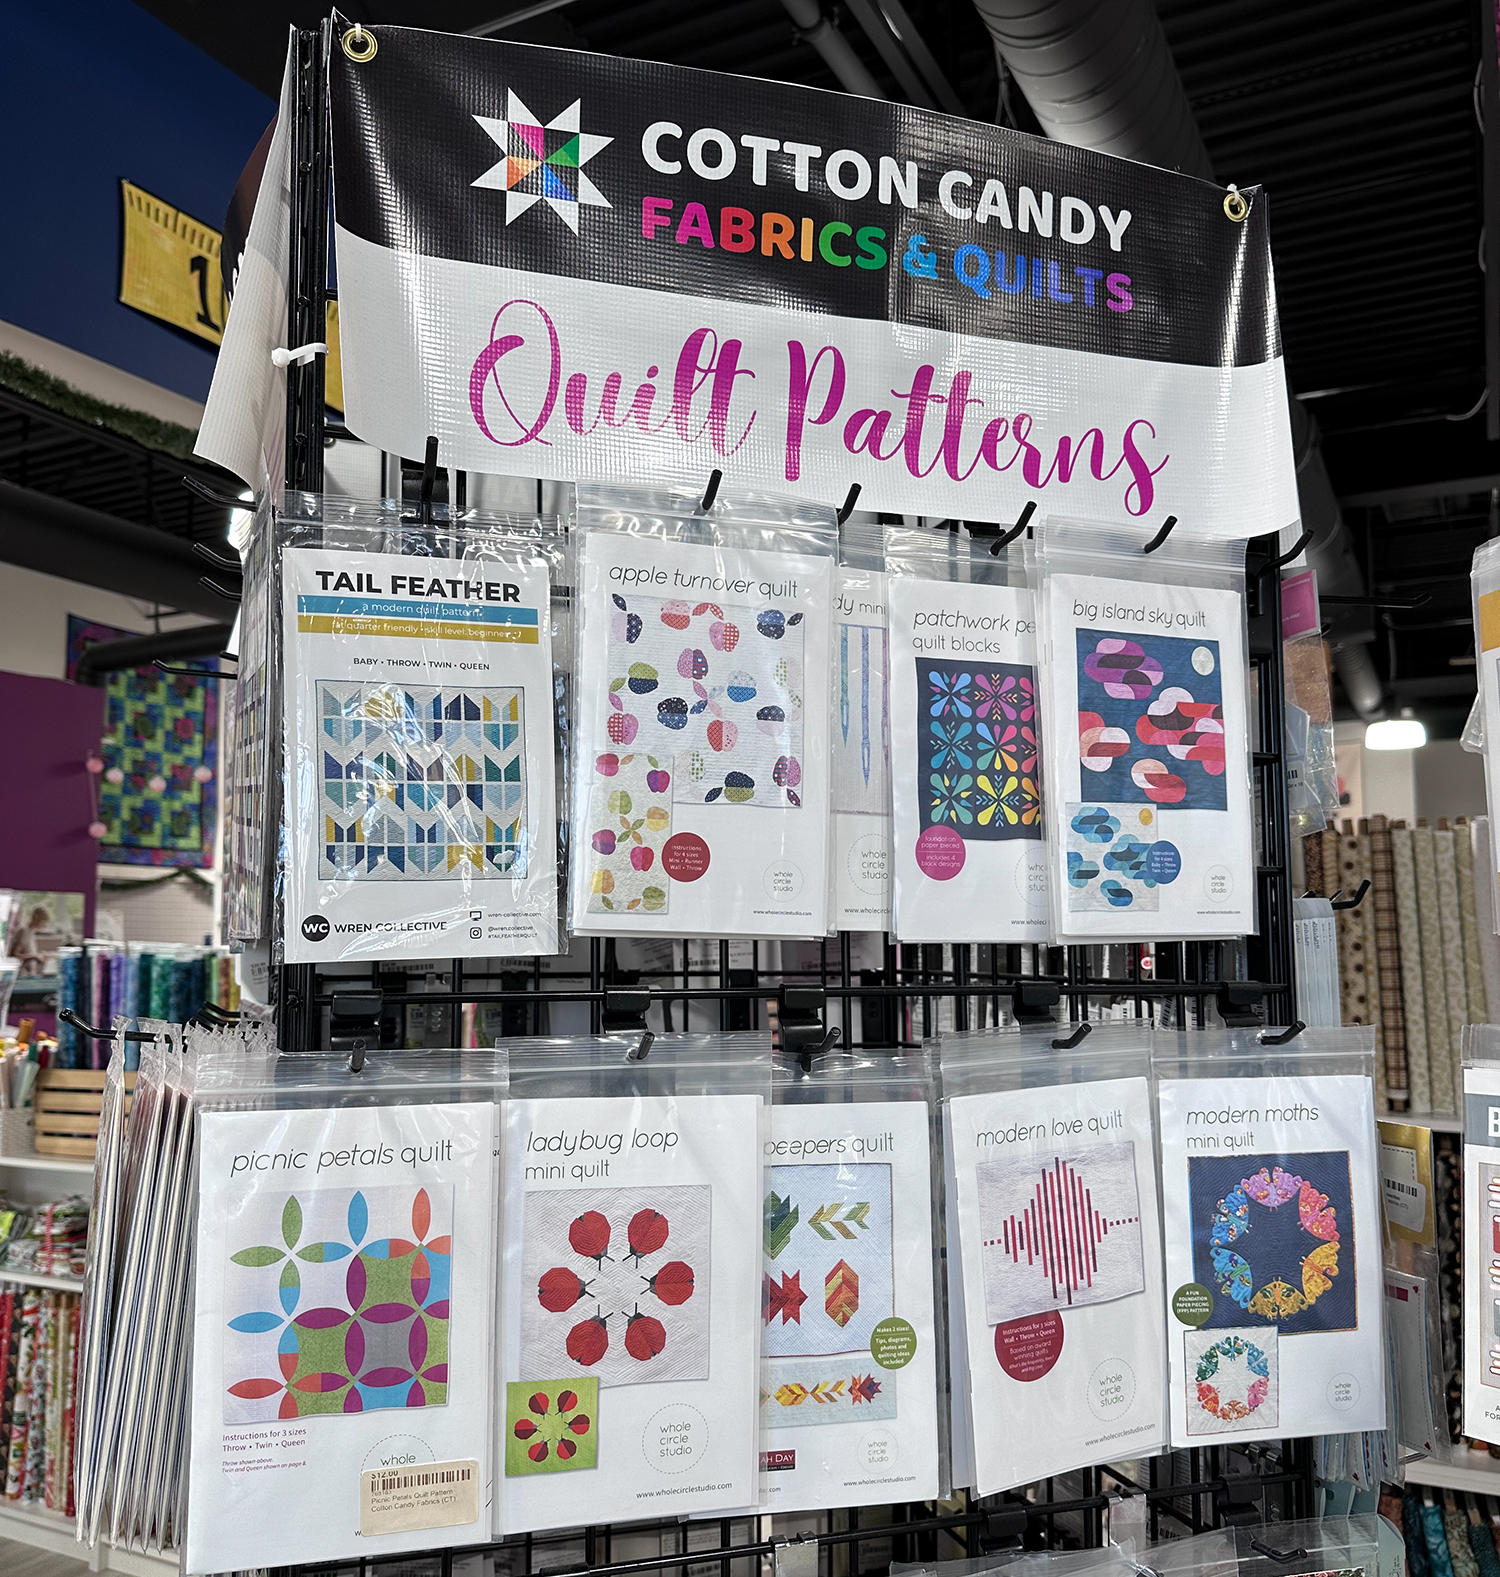 display of quilt patterns and instructions